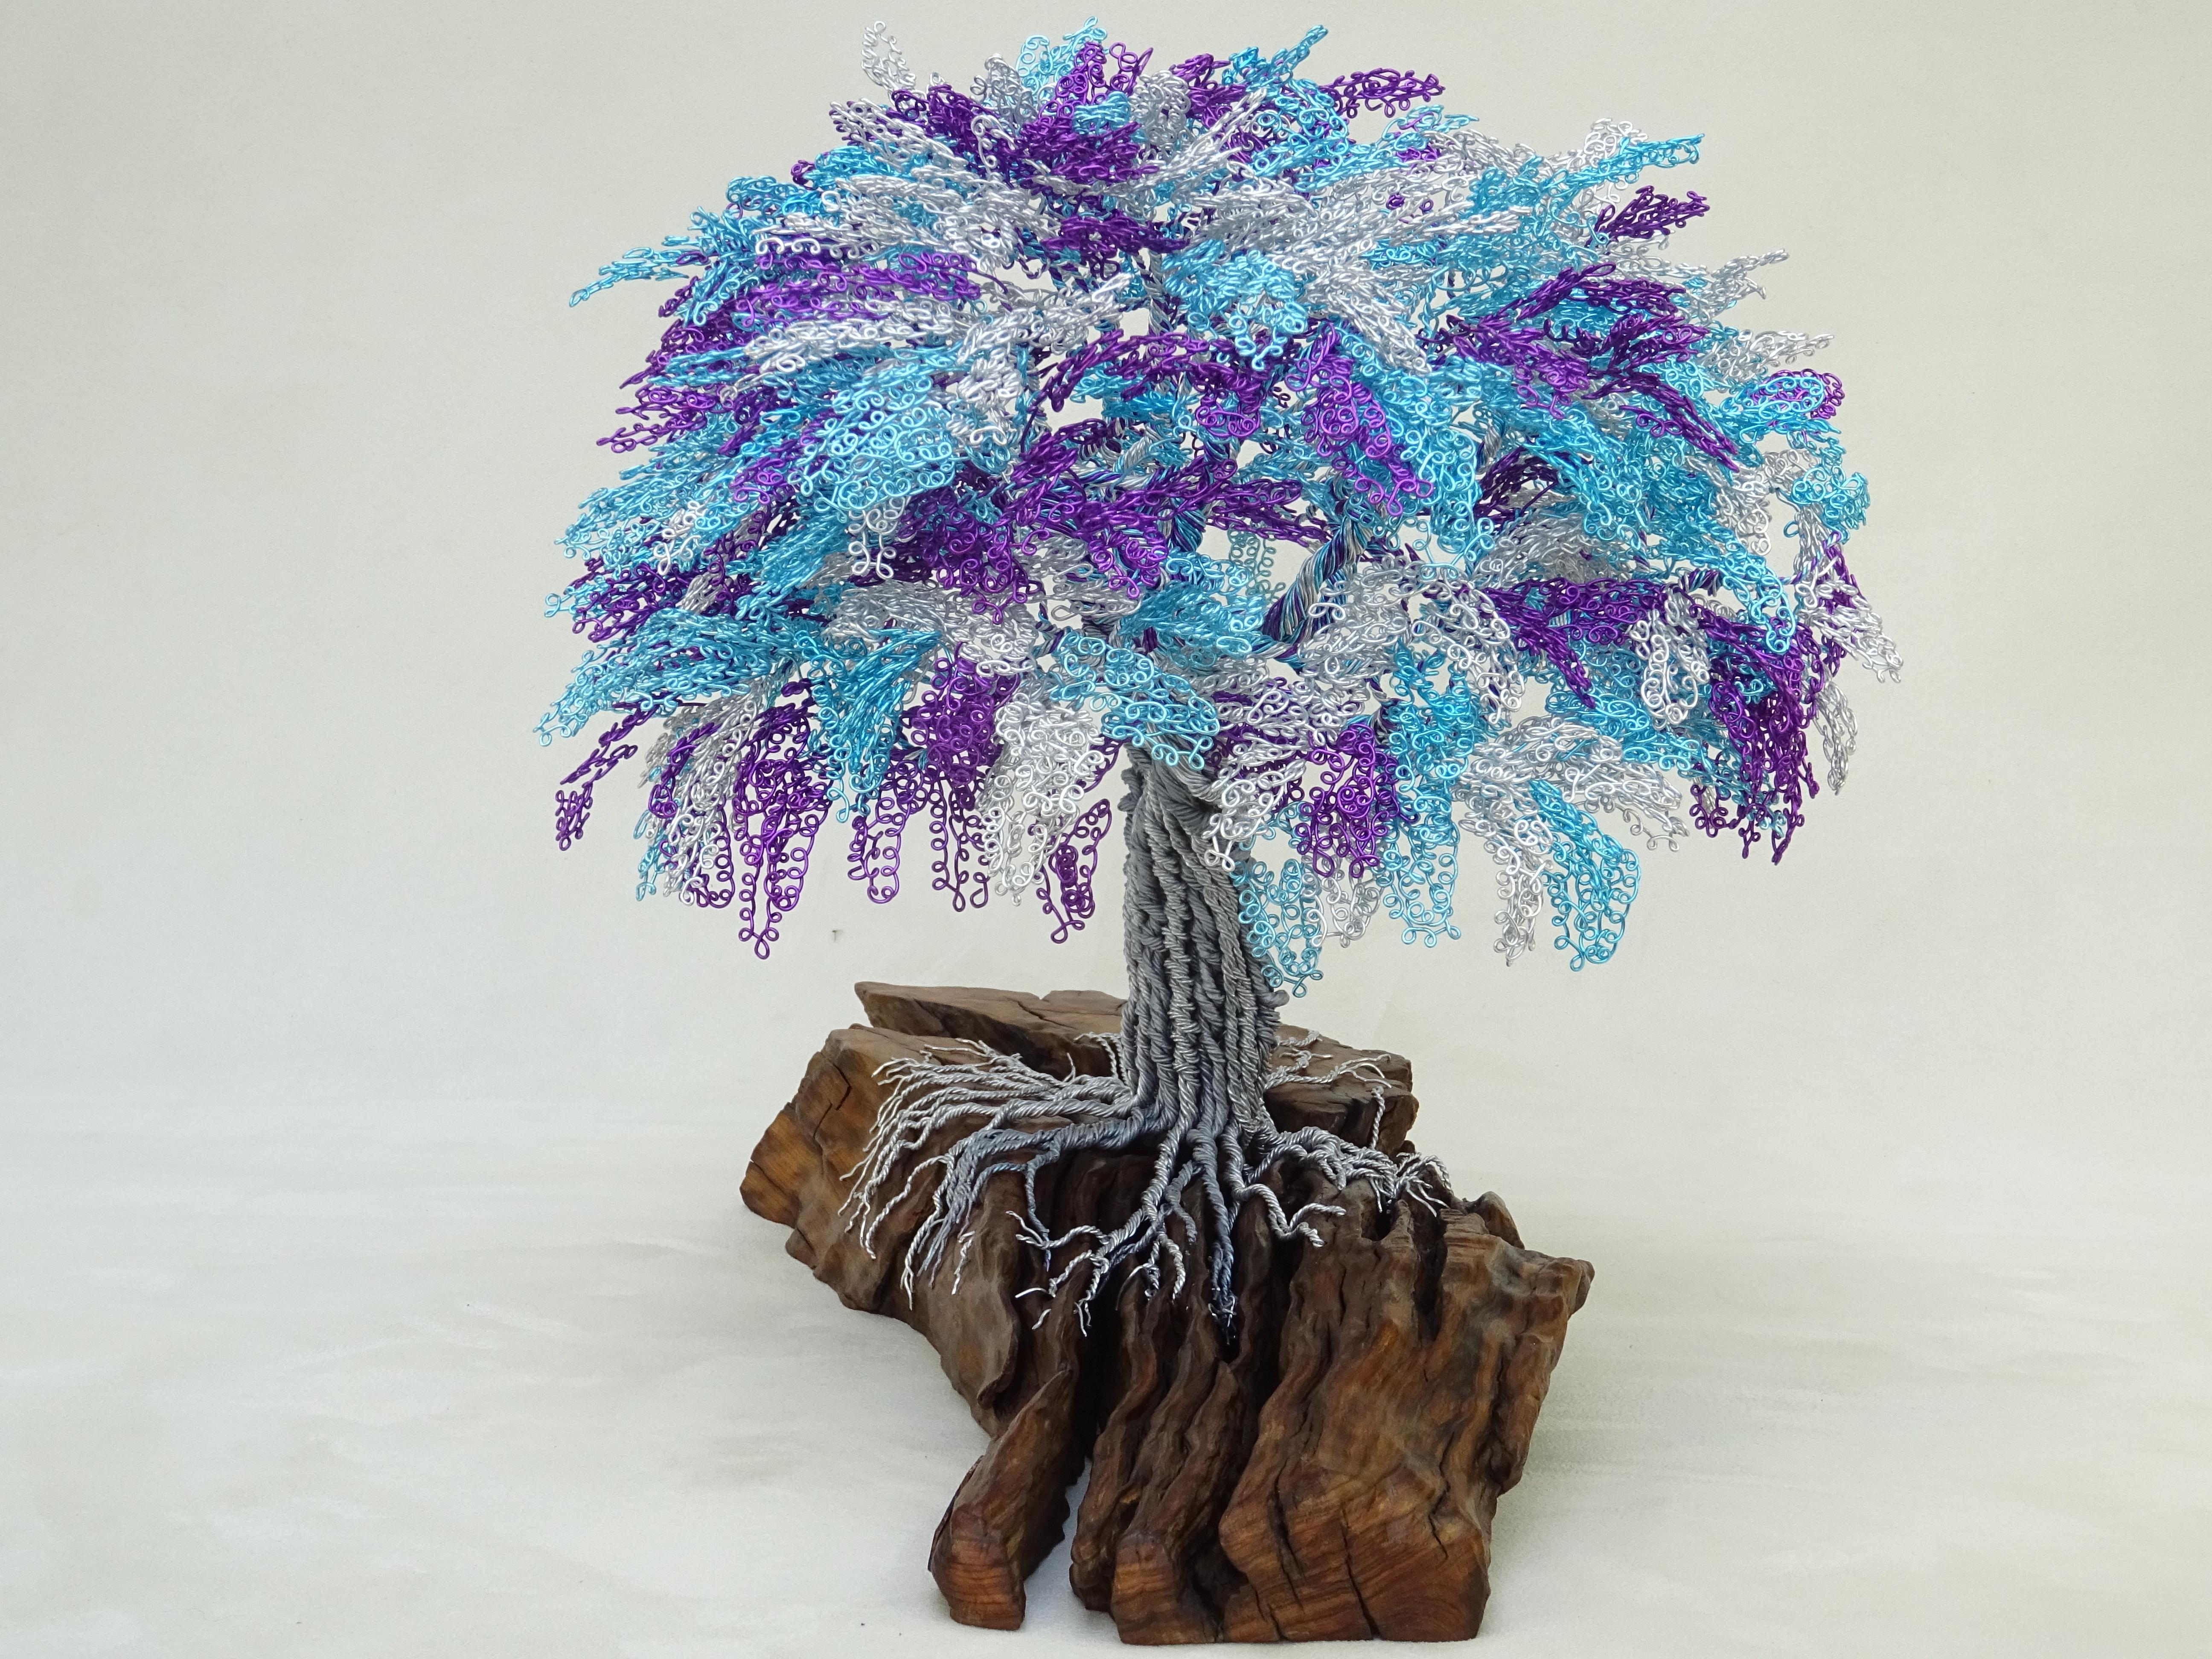 The Latin Vibes Bonsai is inspired by the Jacaranda Tree.
The artisan always takes inspiration from nature and natural events. 
The materials are wood and metals, representing both the strength of life and the roots of Mother Nature.
Sculptures